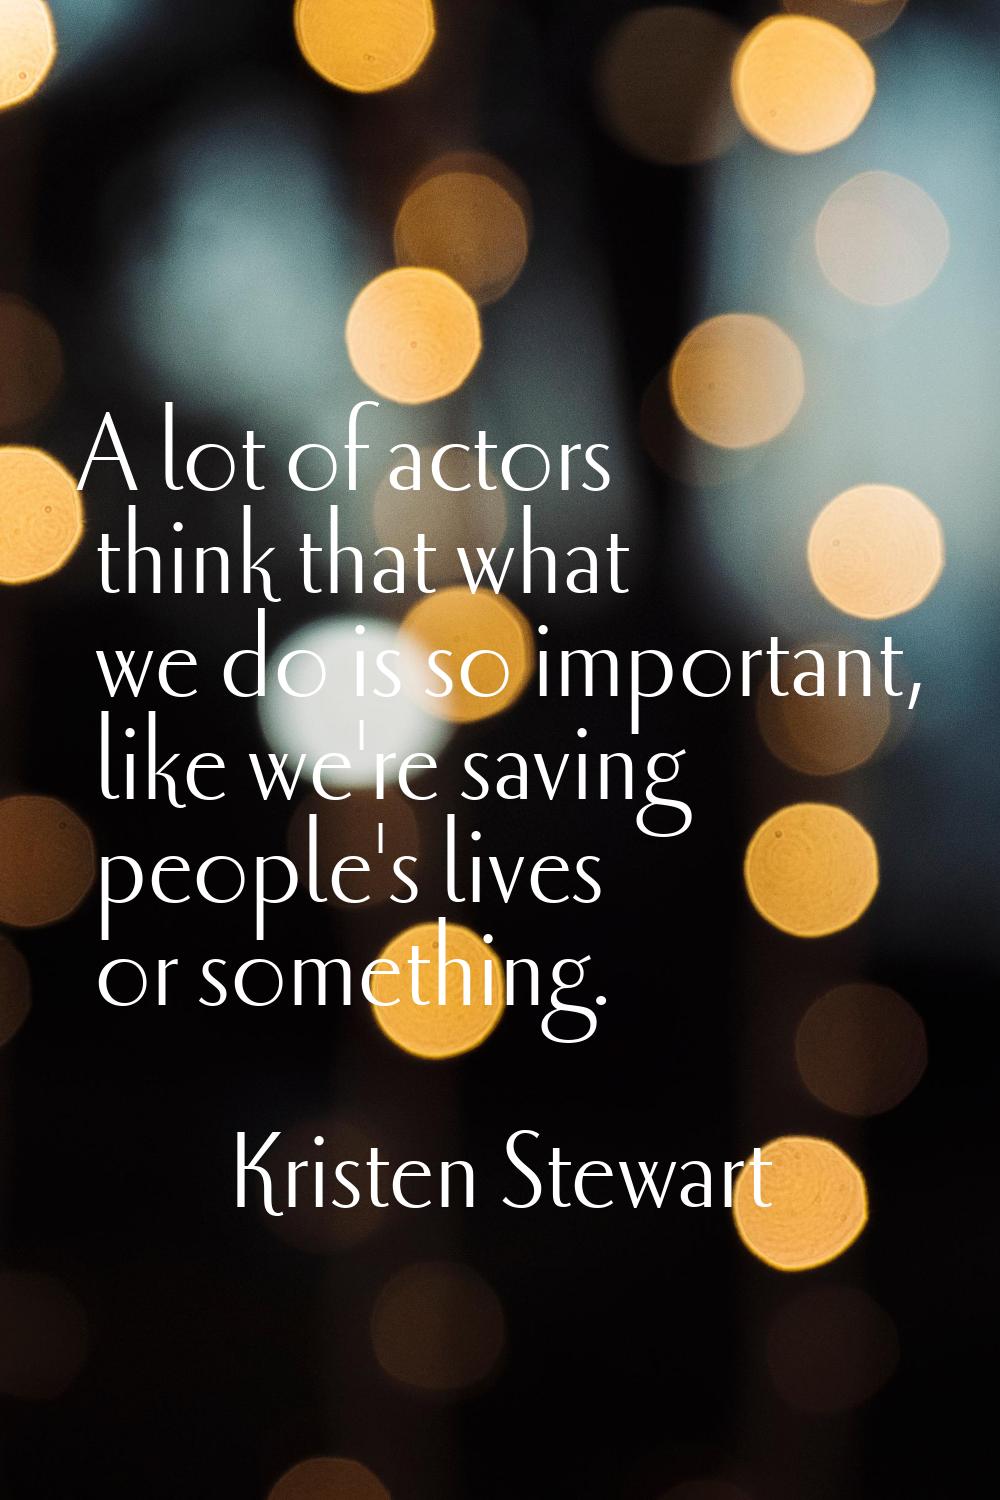 A lot of actors think that what we do is so important, like we're saving people's lives or somethin